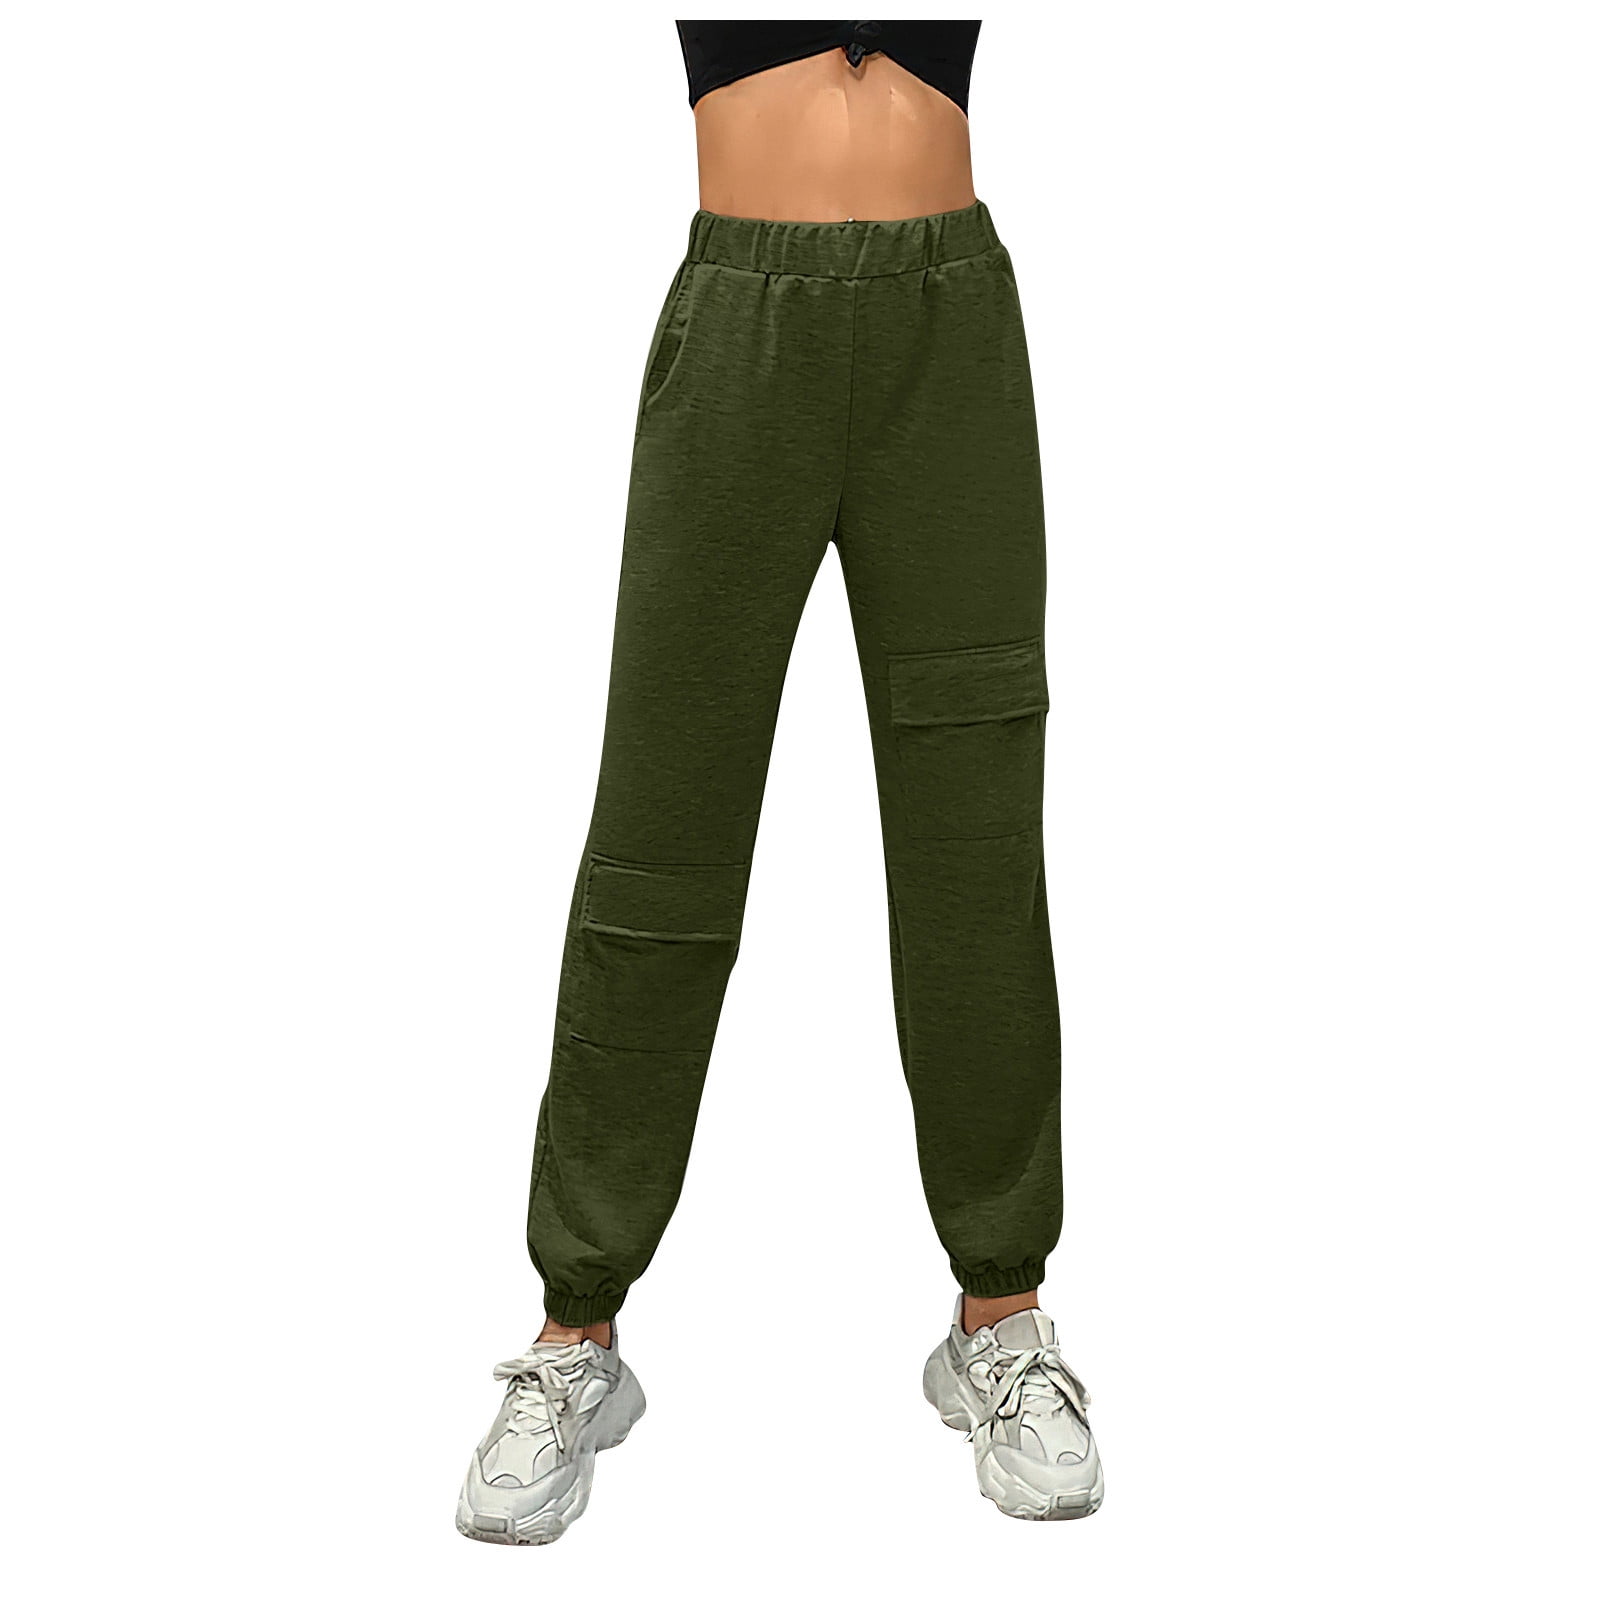 HAPIMO Sales Sweatpants Joggers Pants for Women Solid Color Teens